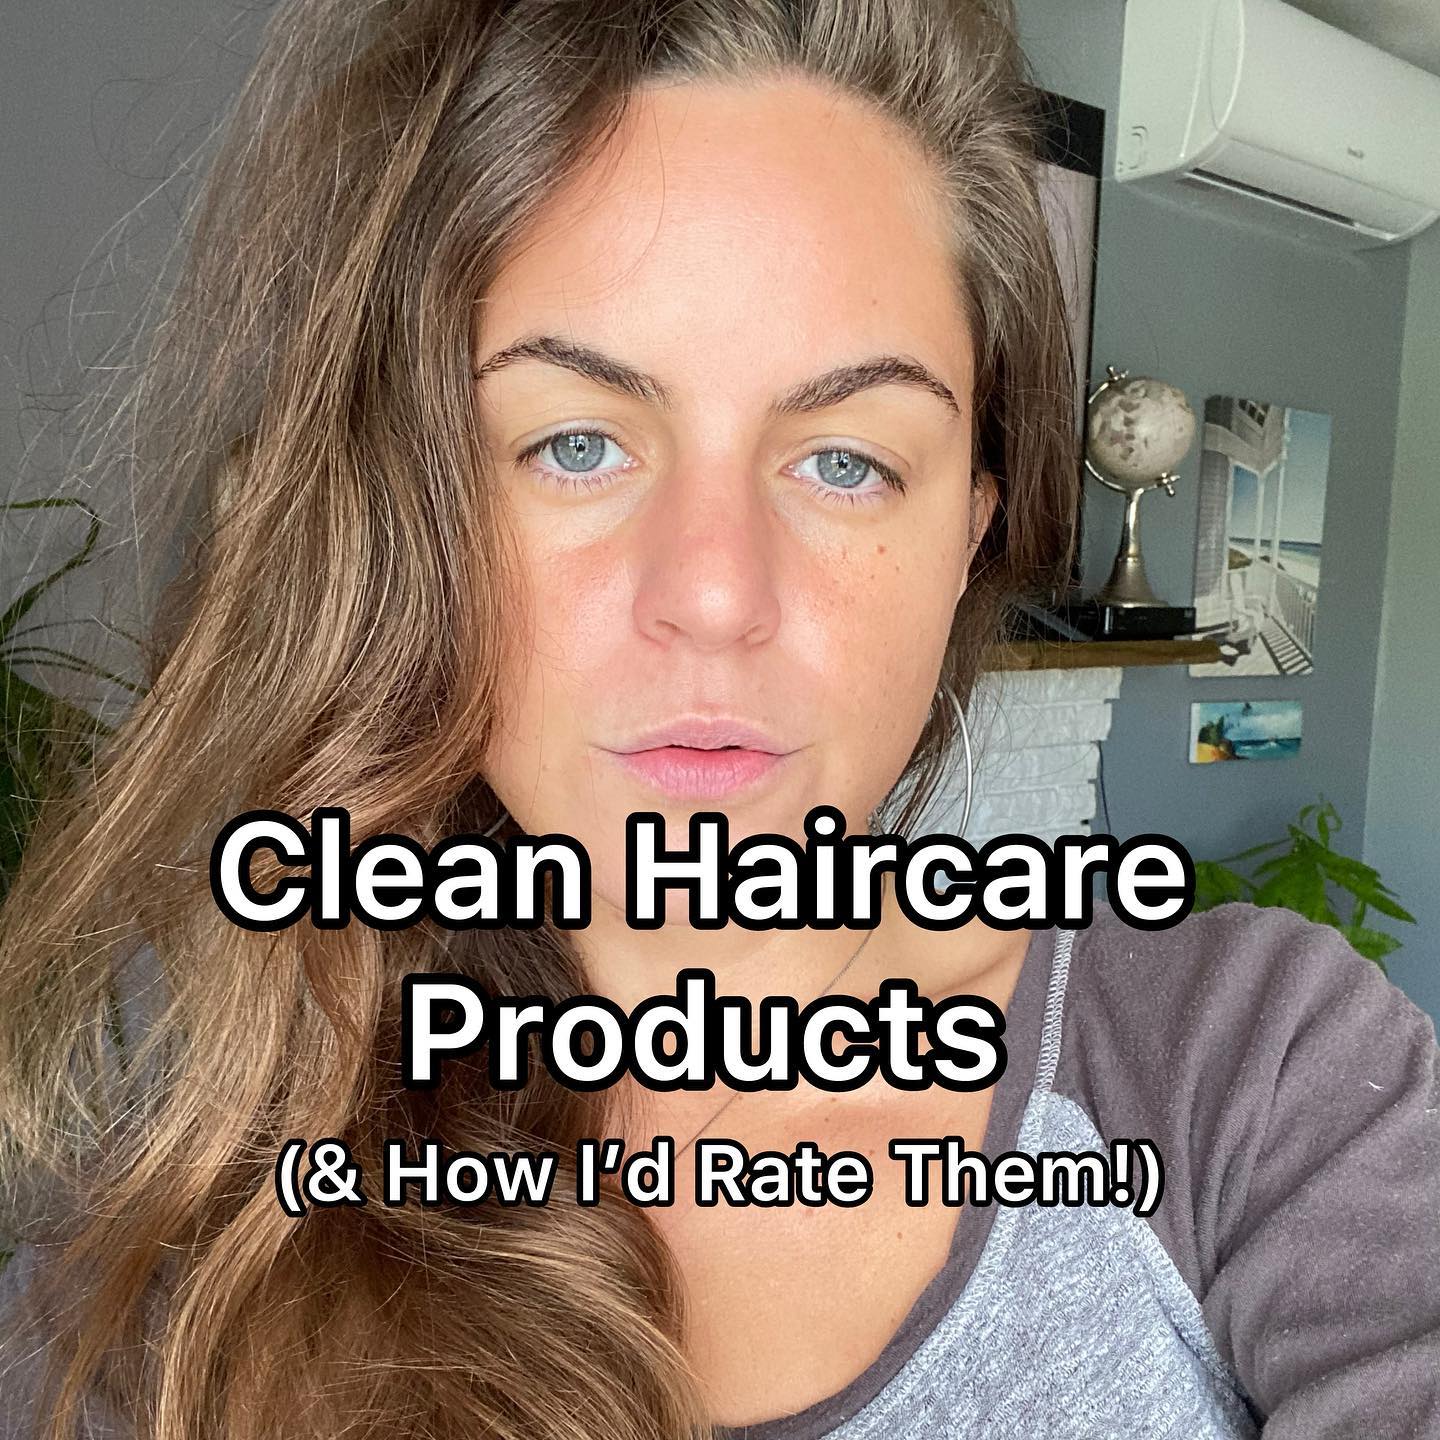 Clean Haircare Products (& How I’d Rate Them!)

@necessaire #nontoxicbeauty #cleanhaircare #cleanhairproducts #ratingbeautyproducts #holisticbeauty #mindfulbeauty #nontoxicbeautyproducts #holisticwellness #holisticlifestyle #yogilifestyle #wellnessgirl #wellnessjourney #wellnesstips #beautytips #lowtoxliving #lowtoxlifestyle #nontoxicswaps